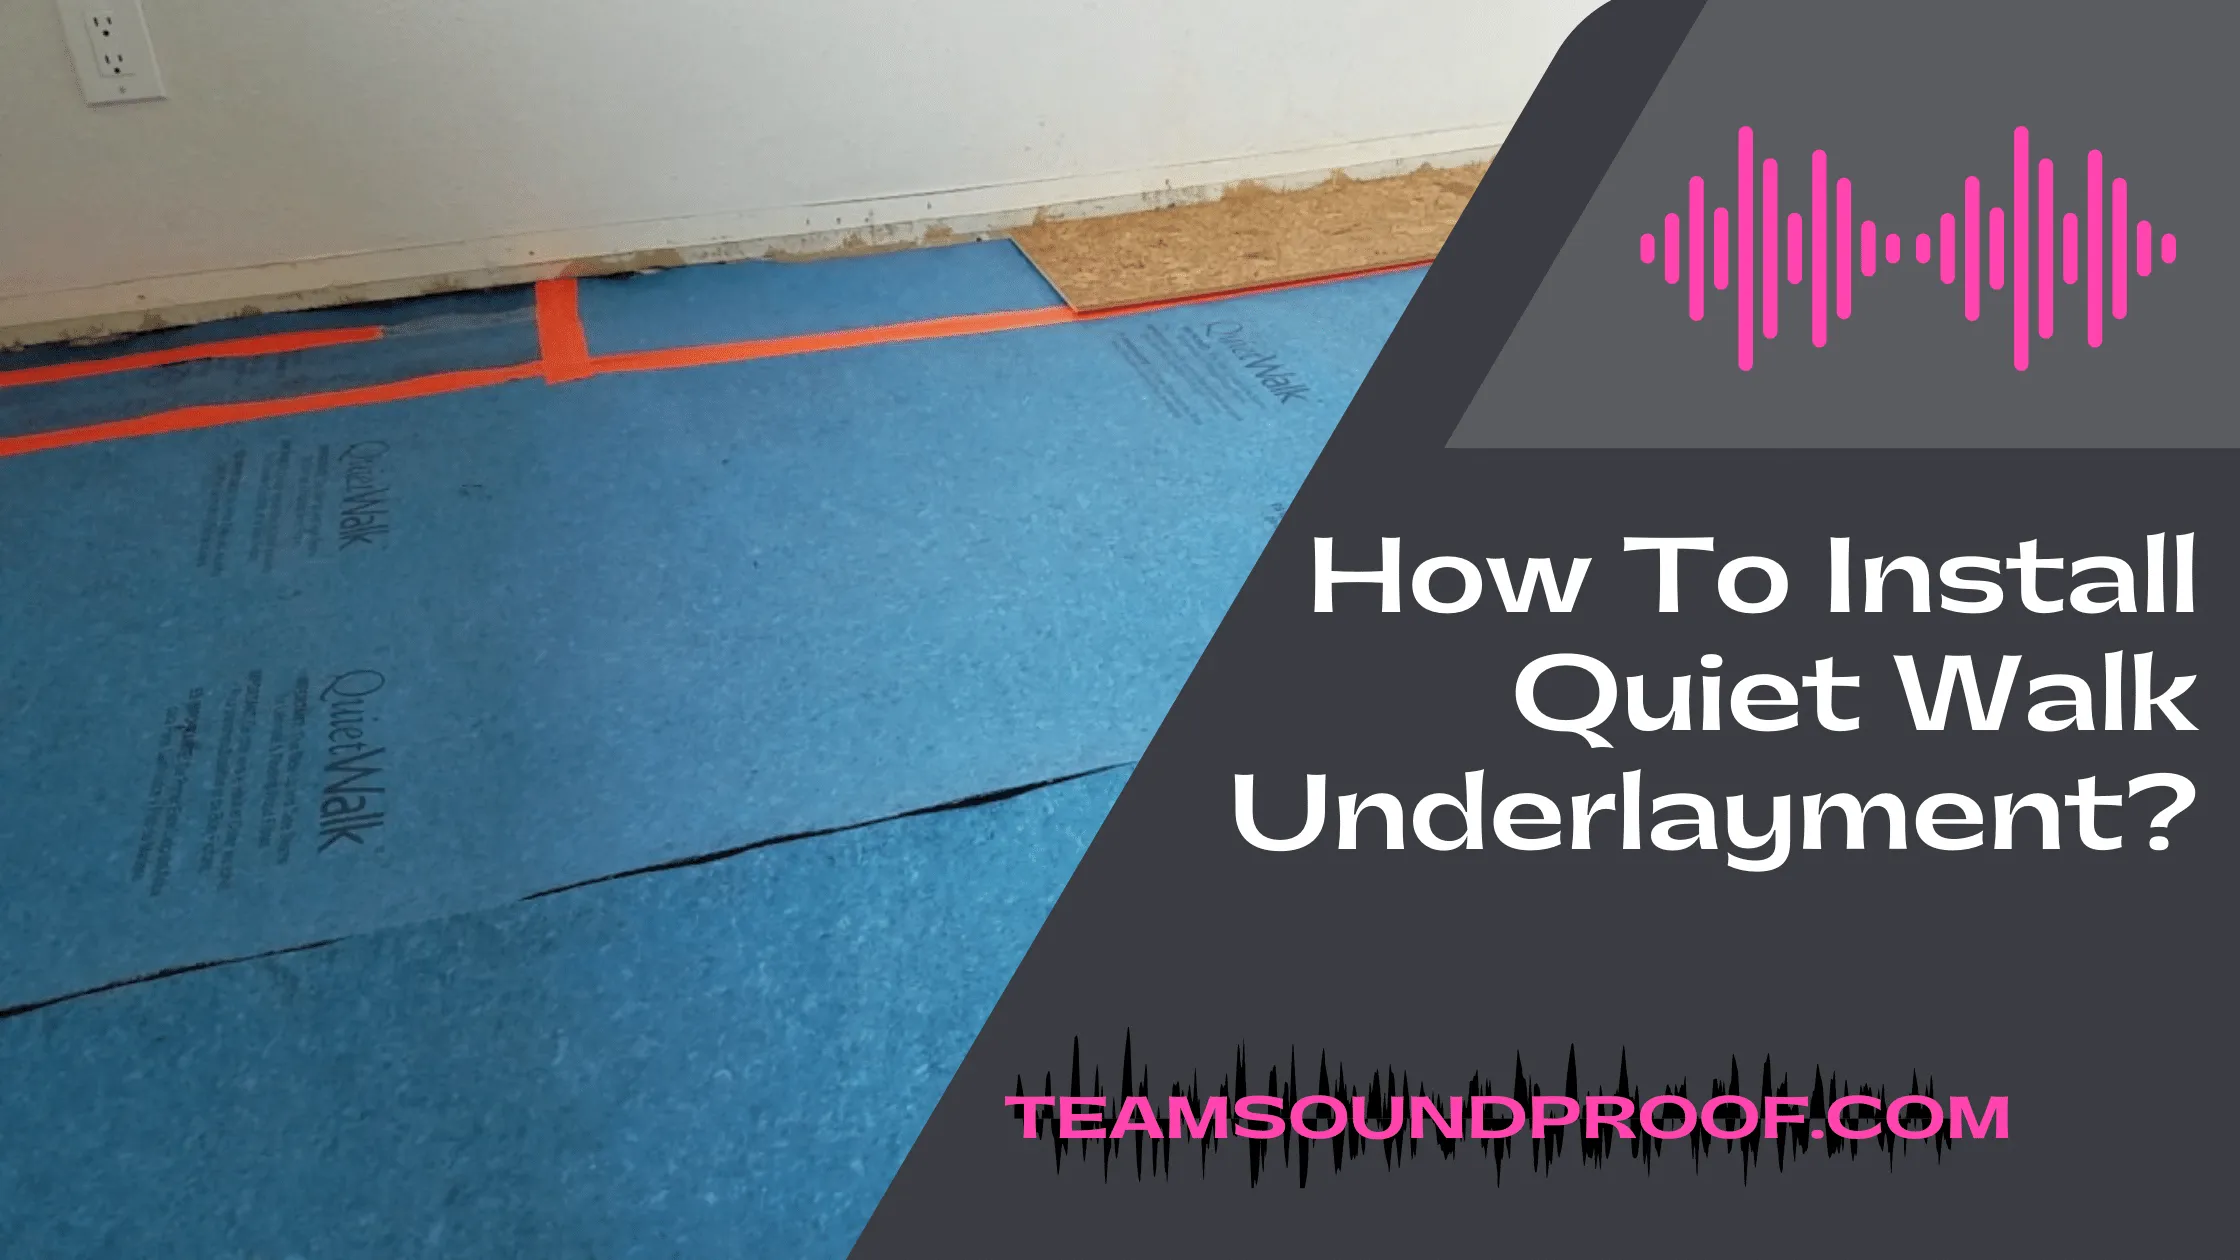 How To Install Quiet Walk Underlayment? - Recommended Guide